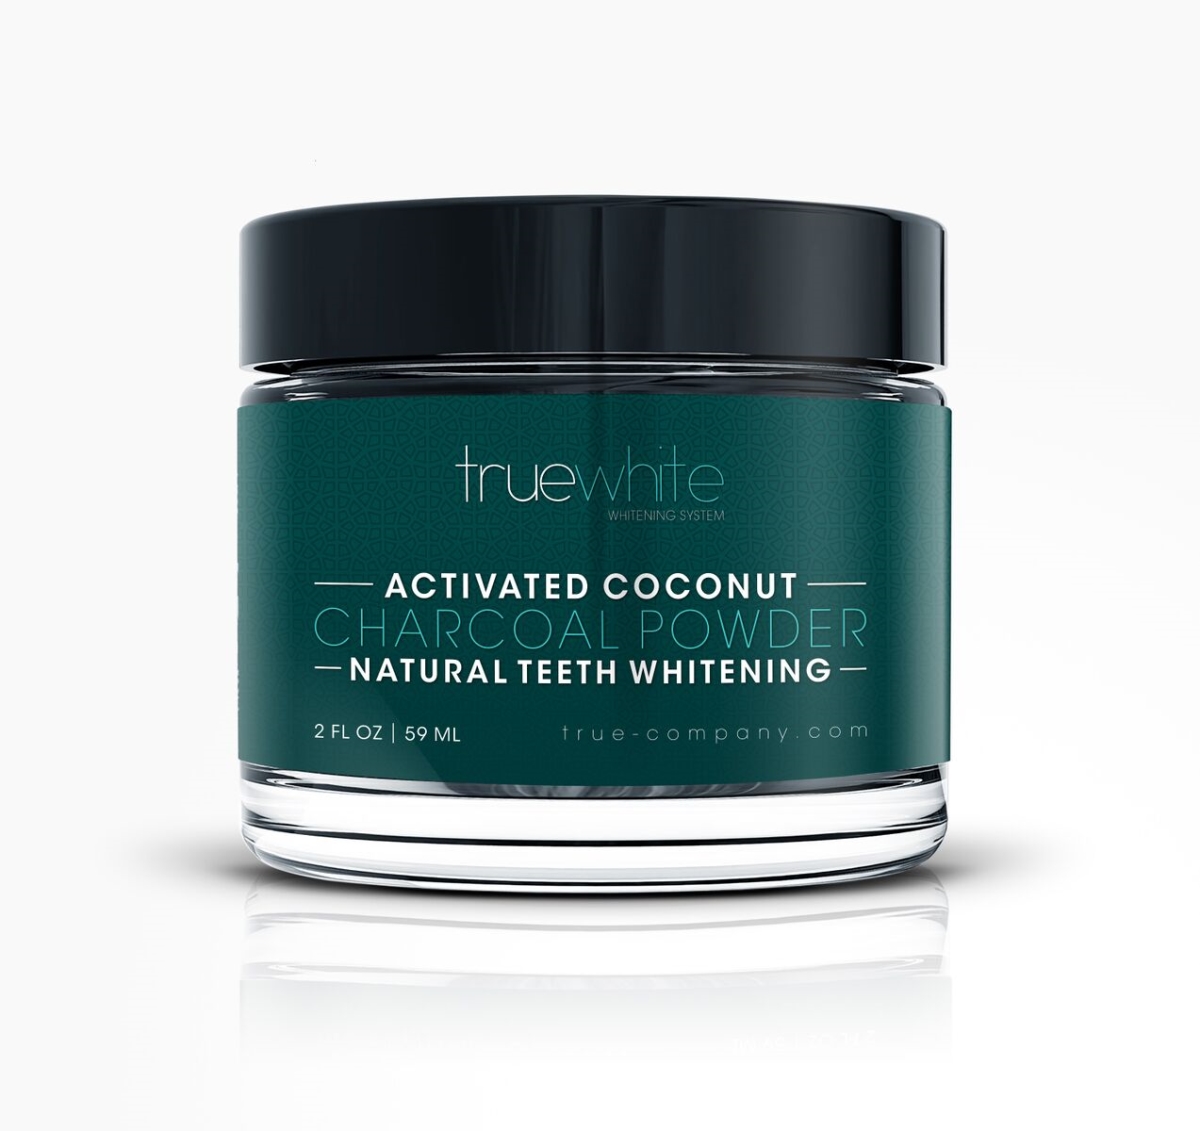 Tw-accp True White Activated Coconut Powder Charcoal